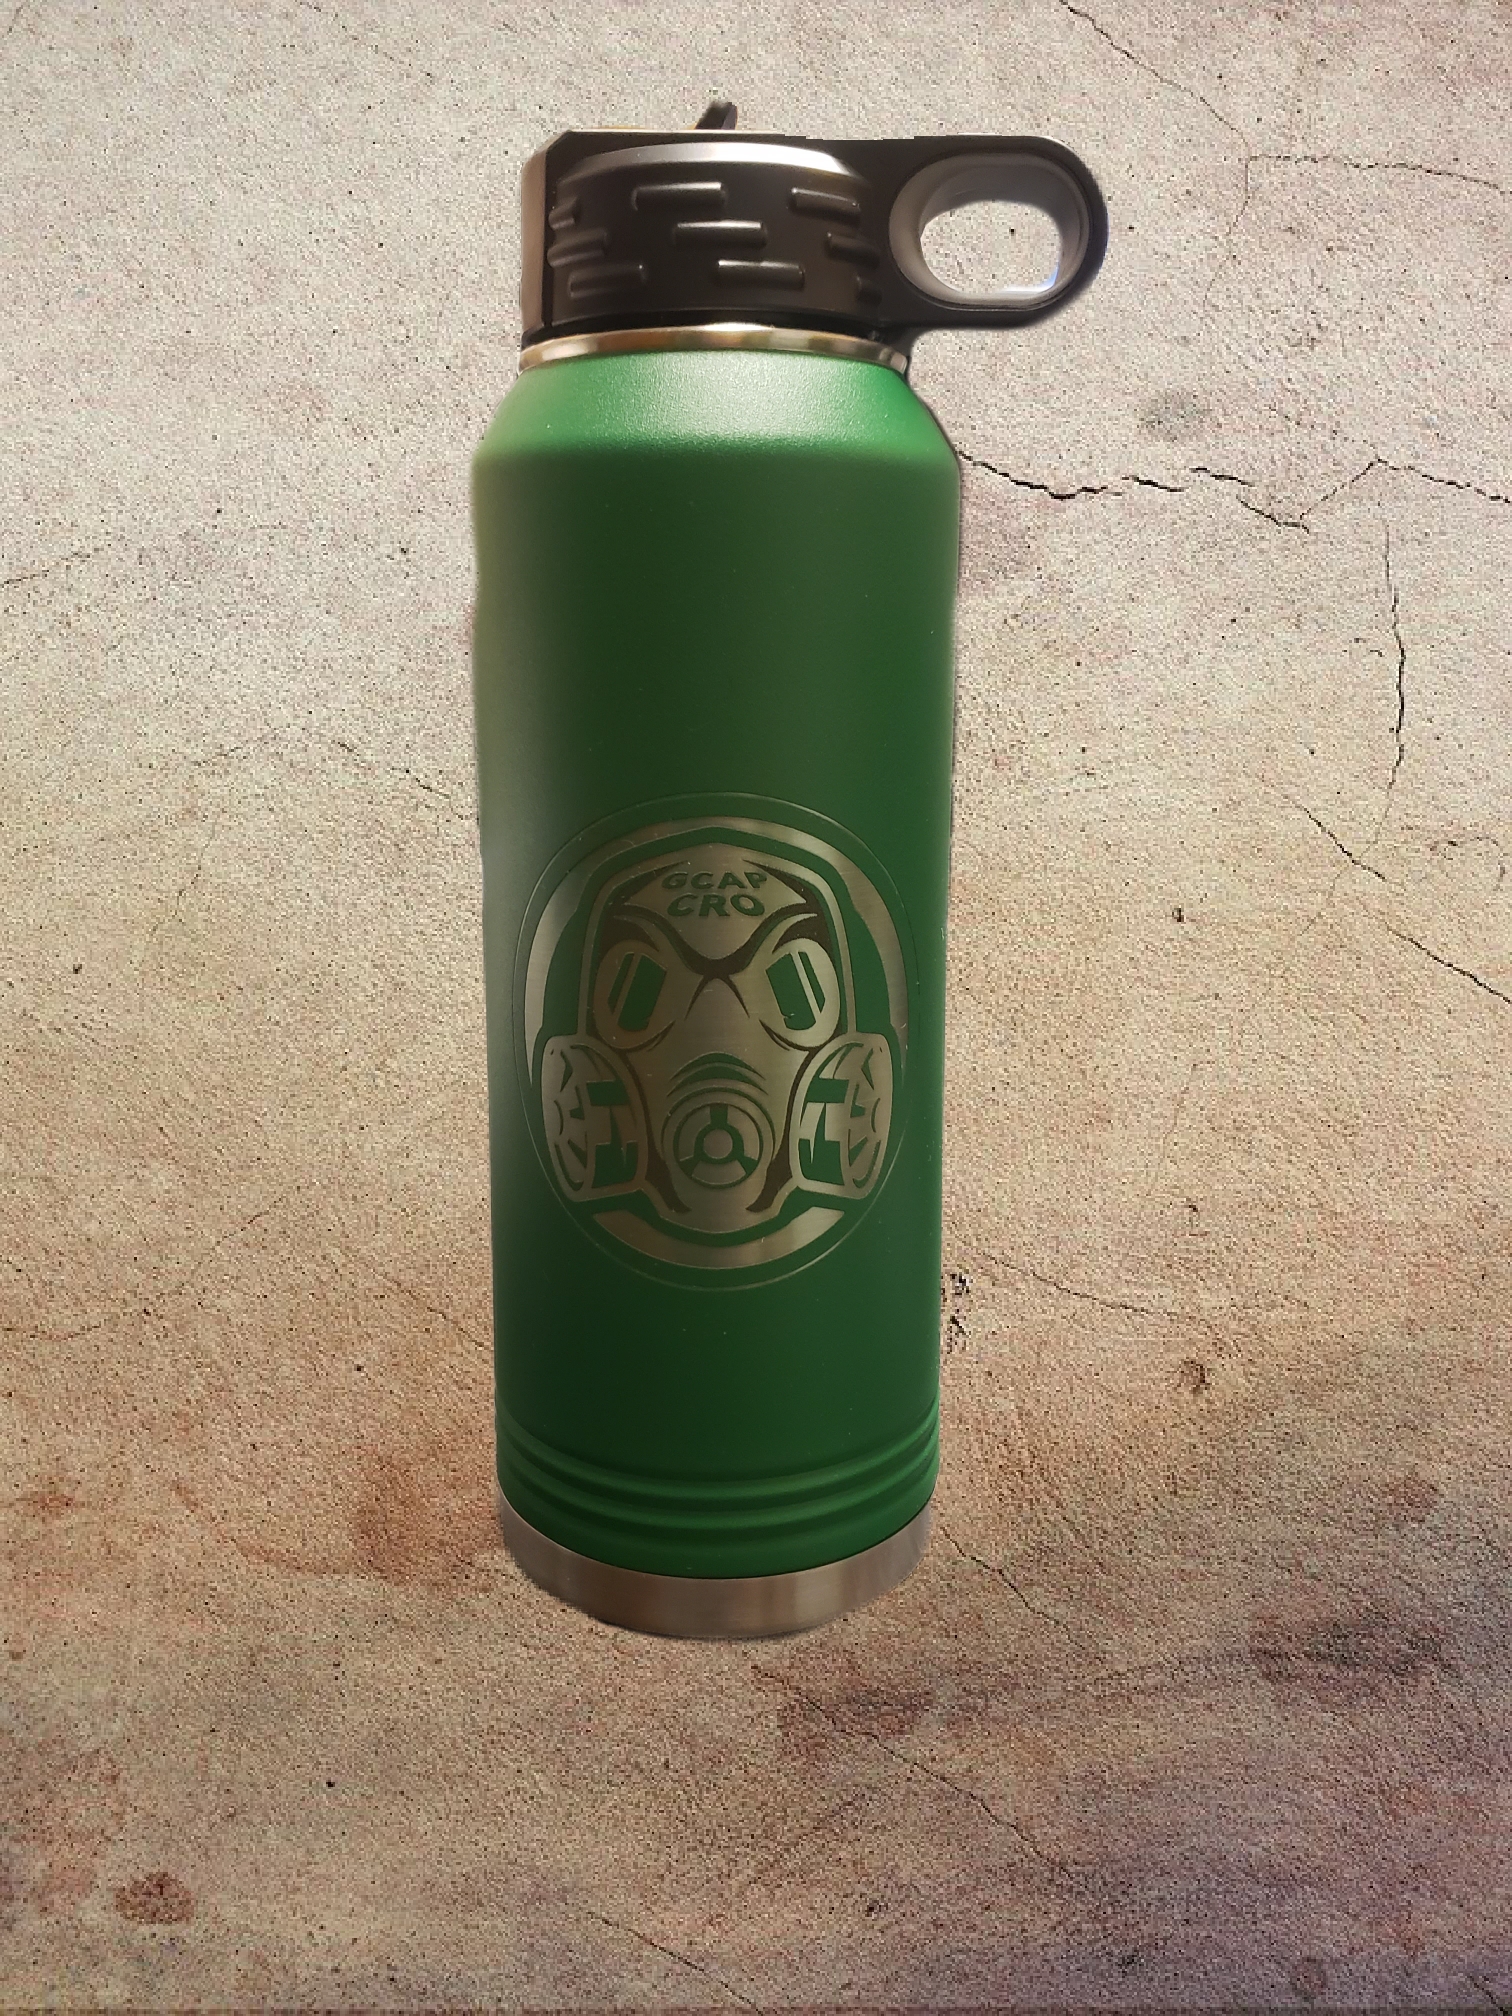 Limited Edition* Certified Refrigeration Operator – CRO Hydro-flask Green